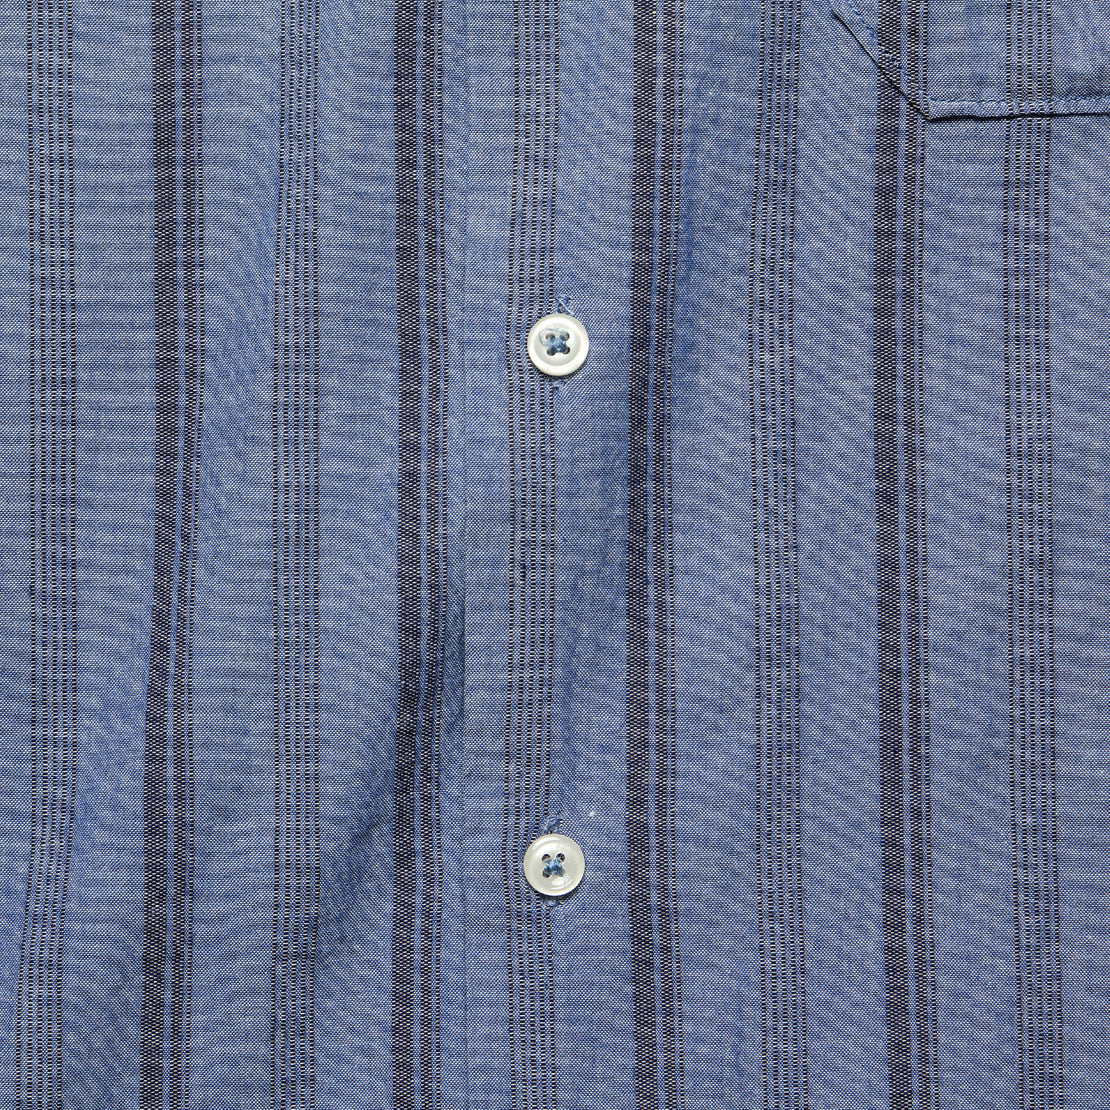 Road Shirt - Blue Cesar Stripe - Universal Works - STAG Provisions - Tops - S/S Woven - Stripe